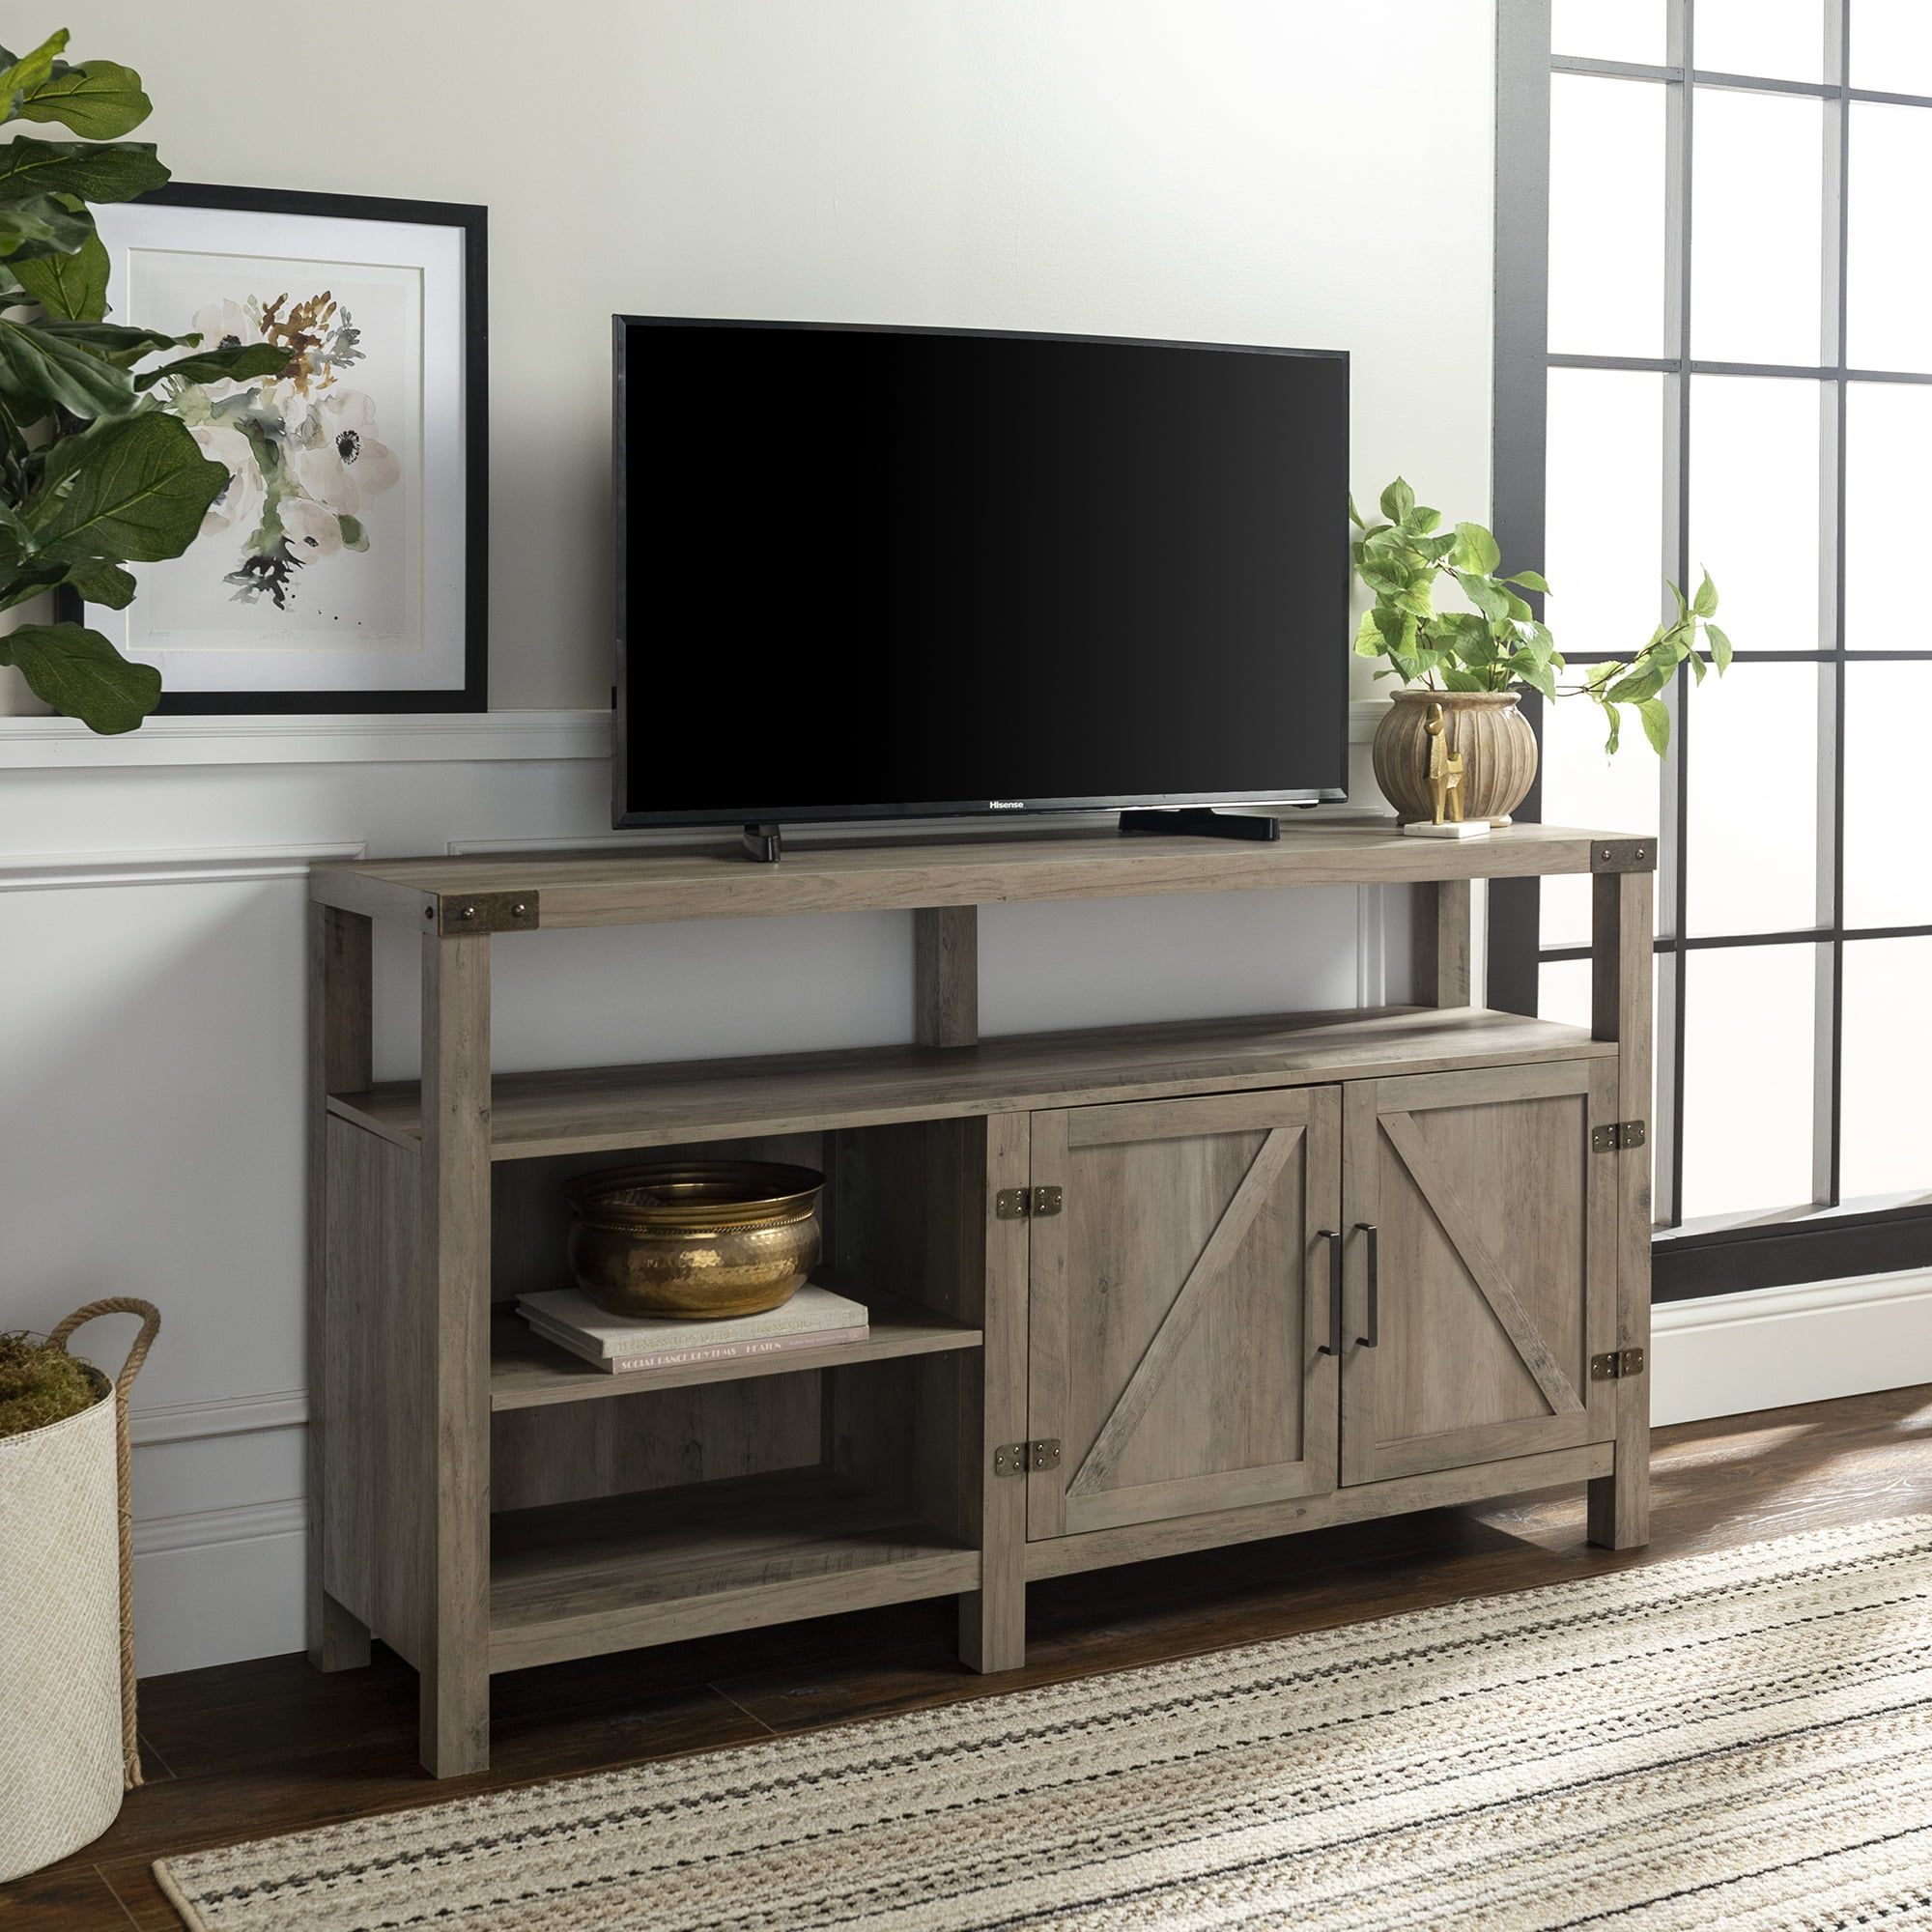 Manor Park Modern Farmhouse Tall Barn Door Tv Stand For Tv's Up To 64 Intended For Farmhouse Rattan Tv Stands (Gallery 16 of 20)